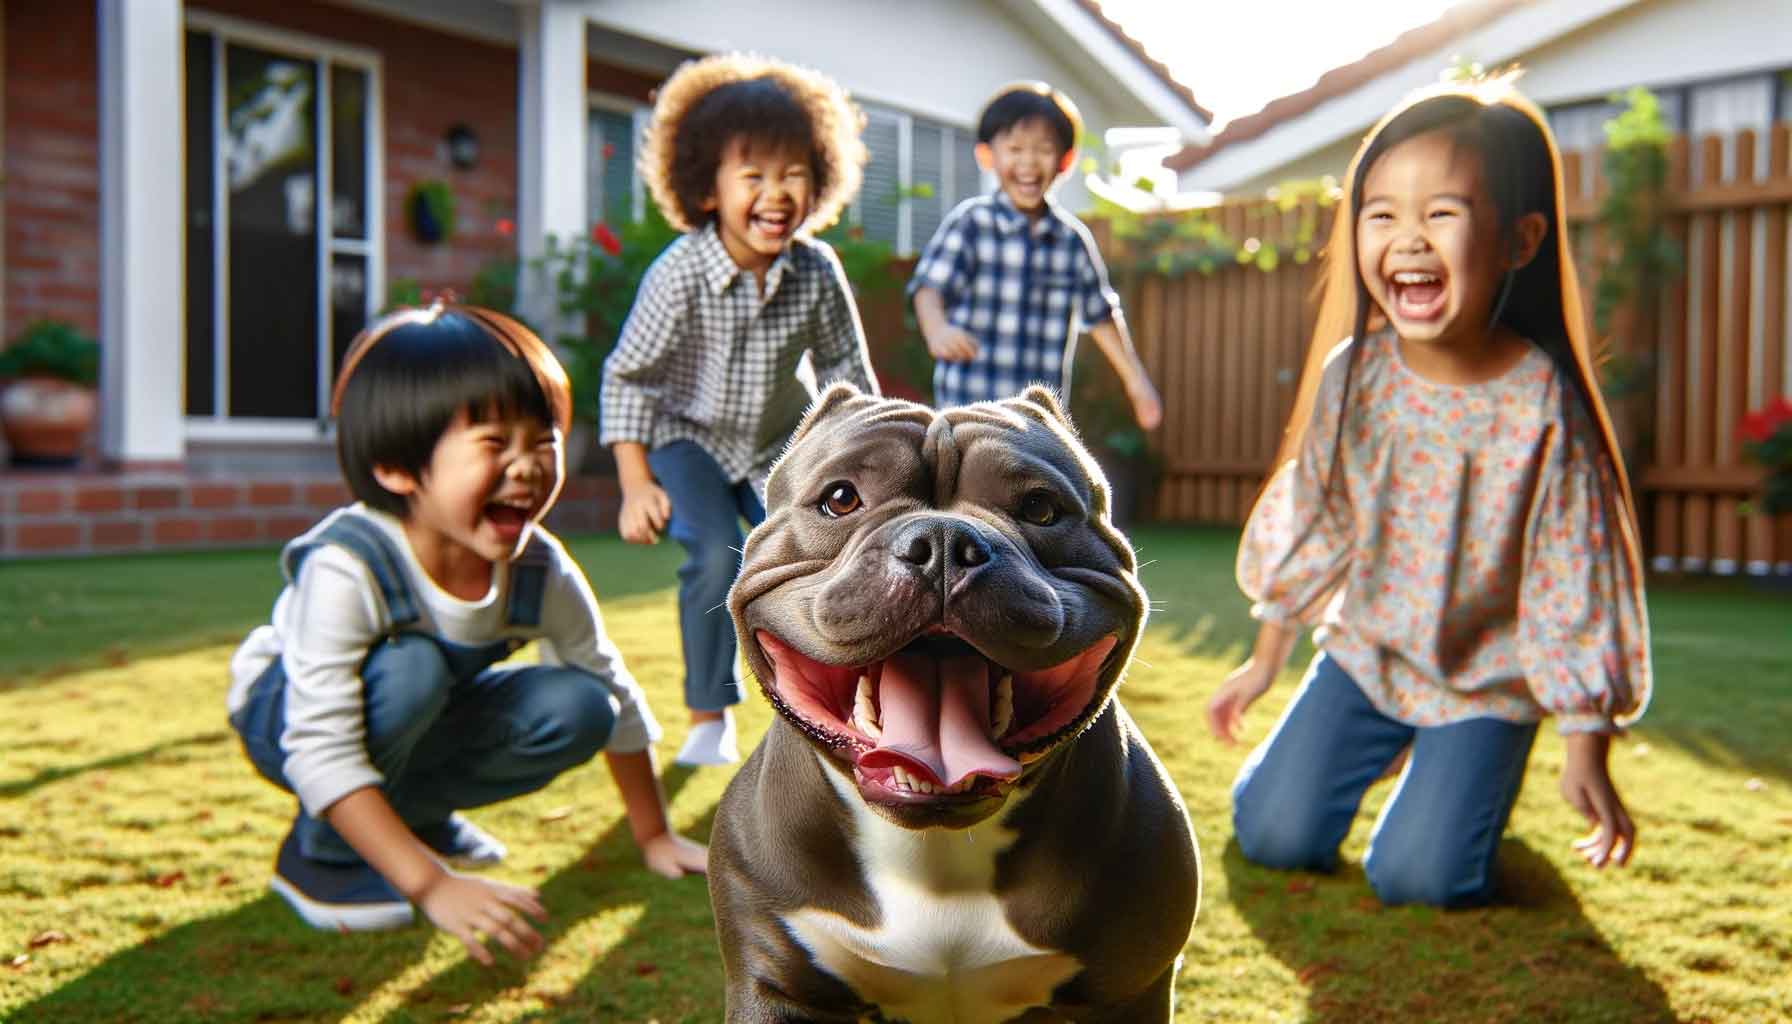 Smiling Super Micro Bully happily playing with children in a sunny backyard, showcasing its affectionate nature.